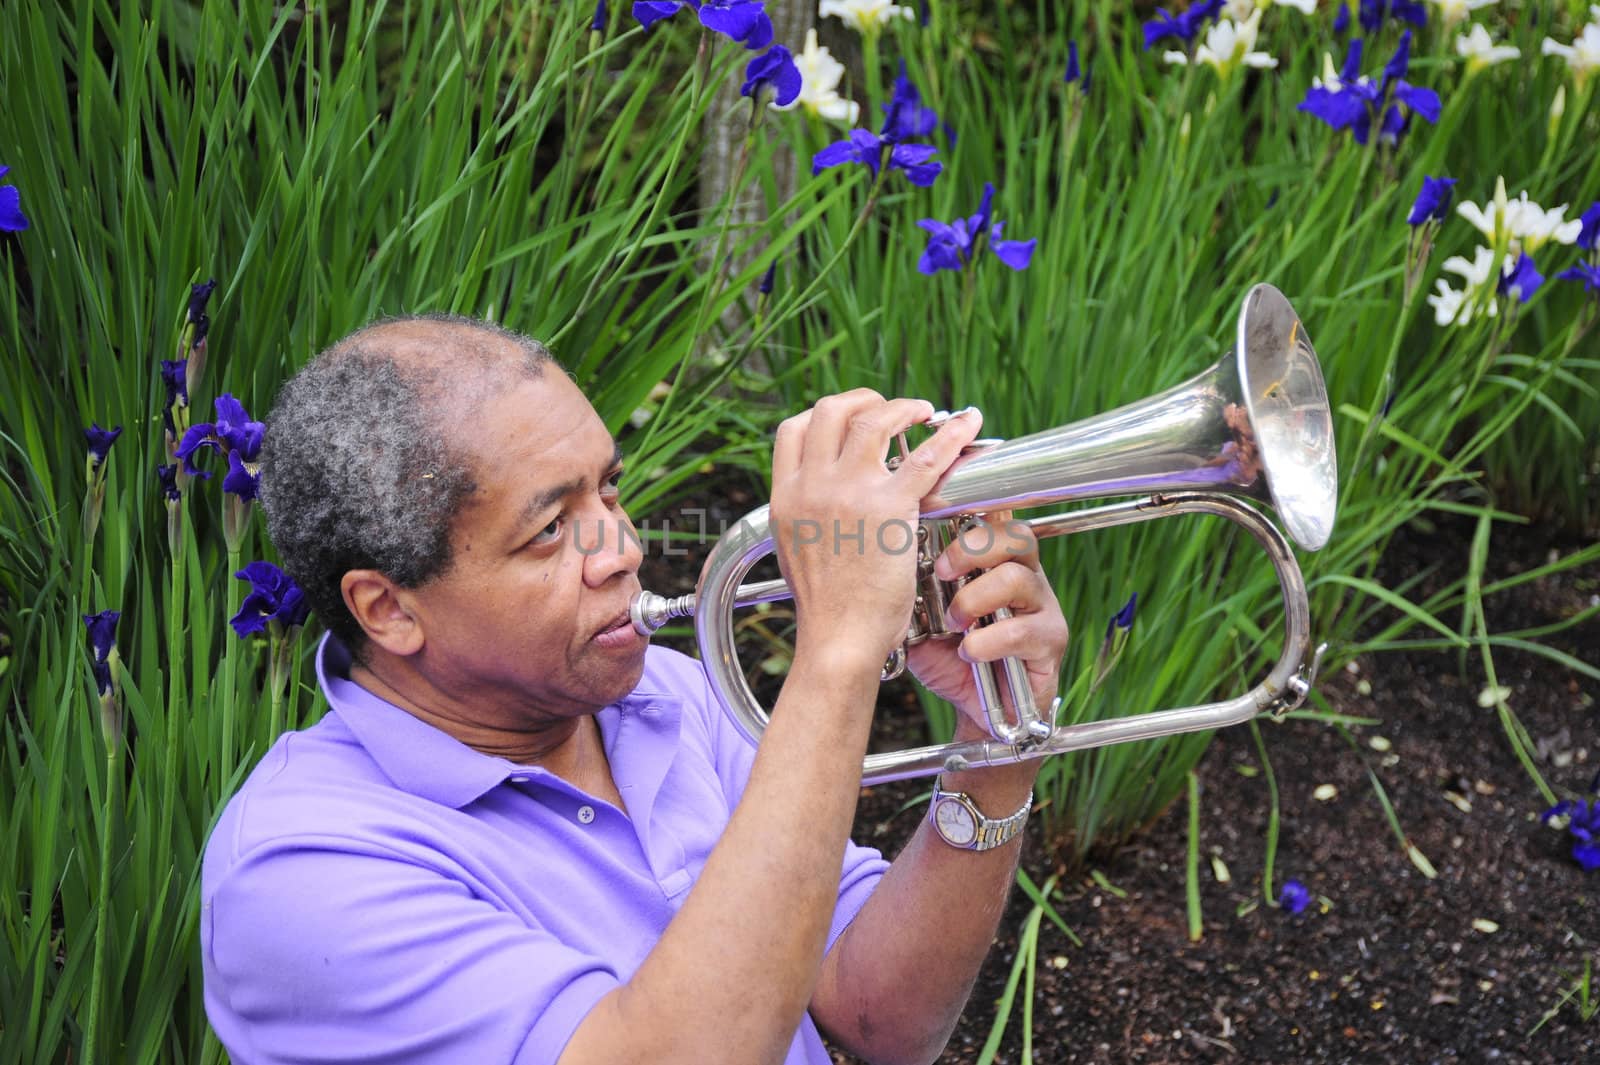 African American male with his flugelhorn outdoors.